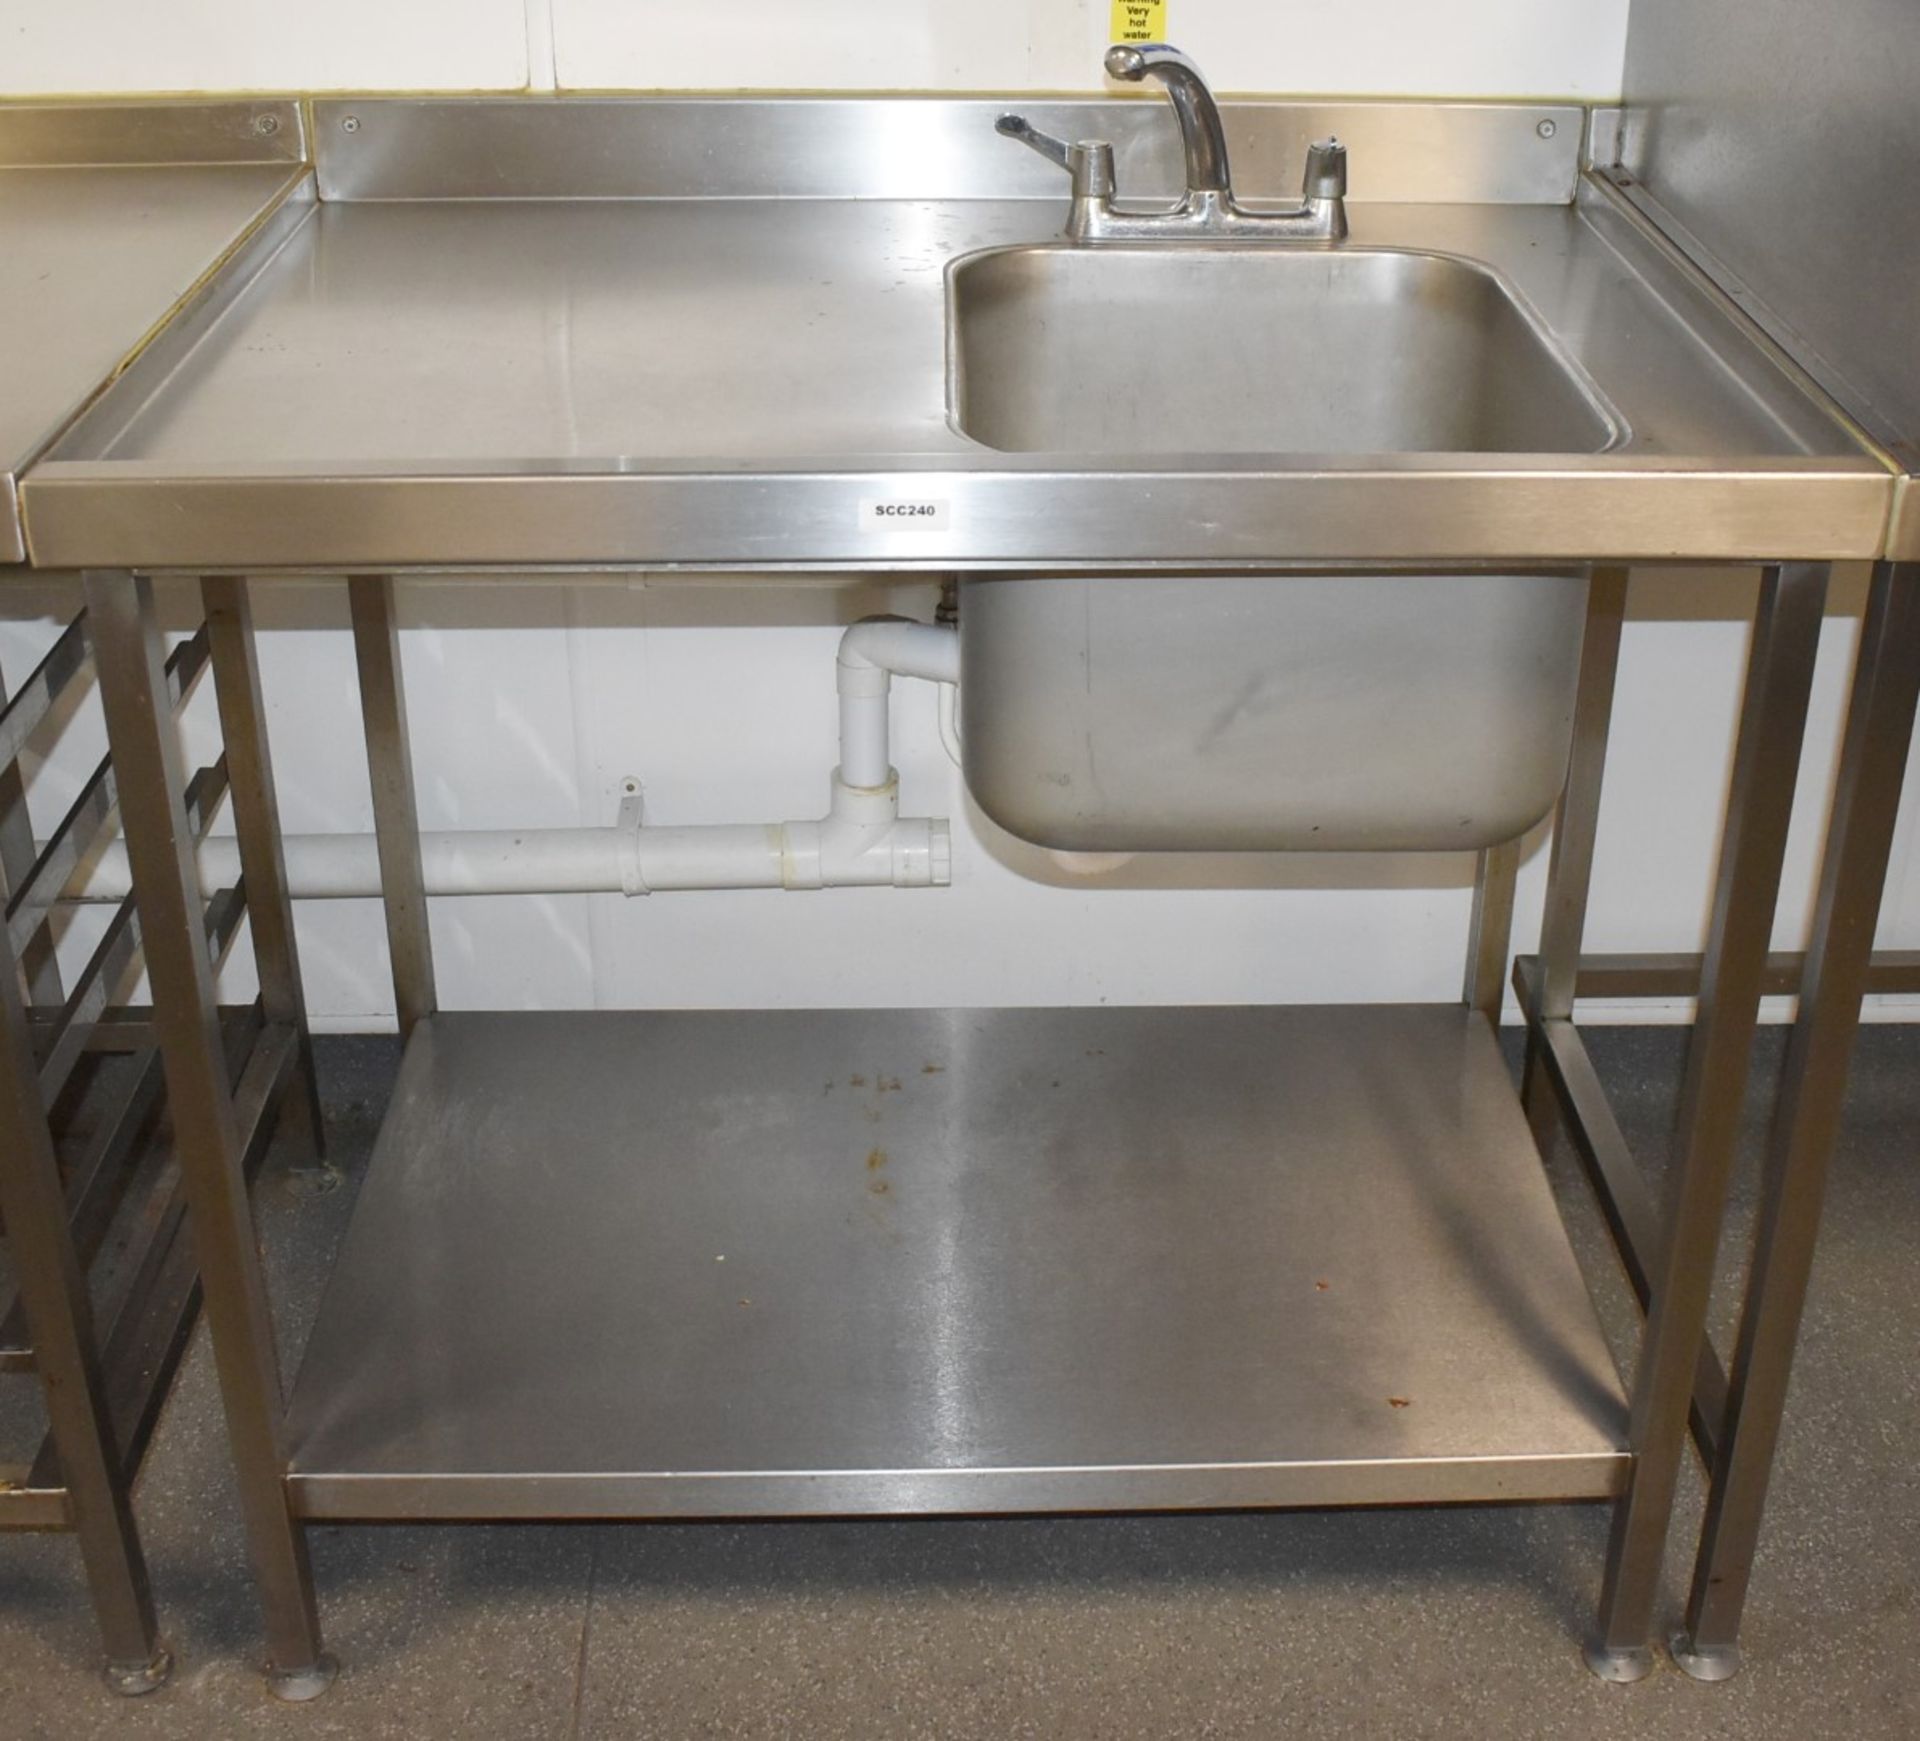 1 x Commercial Wash Unit With Large Sink Bowl, Mixer Tap, Undershelf, Upstand and Anti Spill Surface